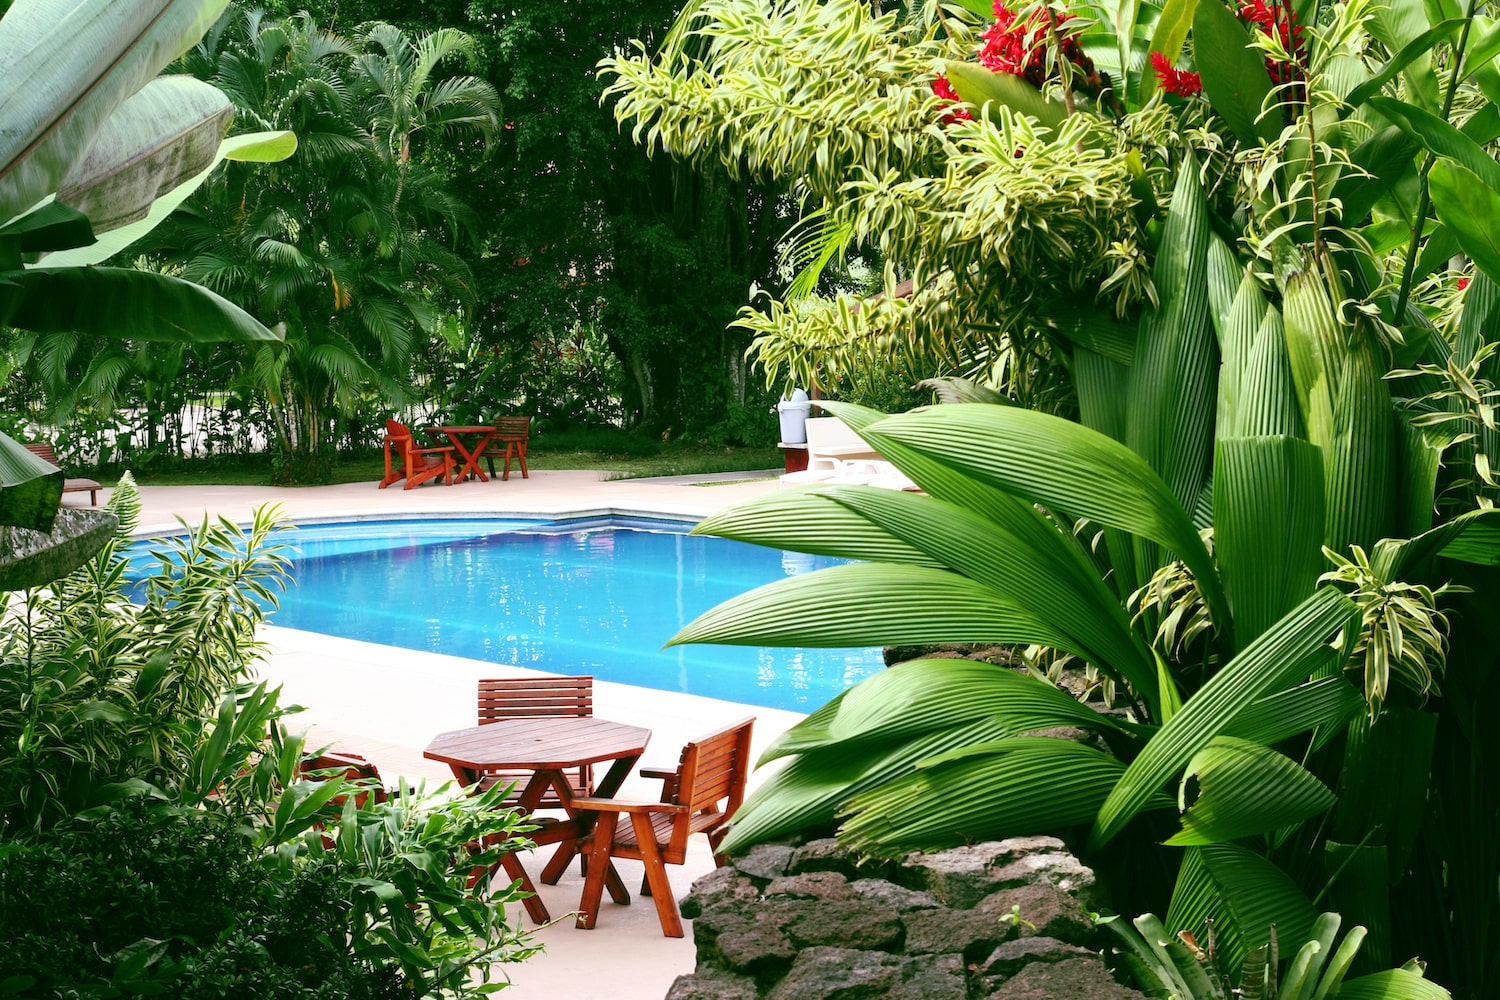 Creating a Tropical Paradise: Plants and Landscaping for Your Pool Area